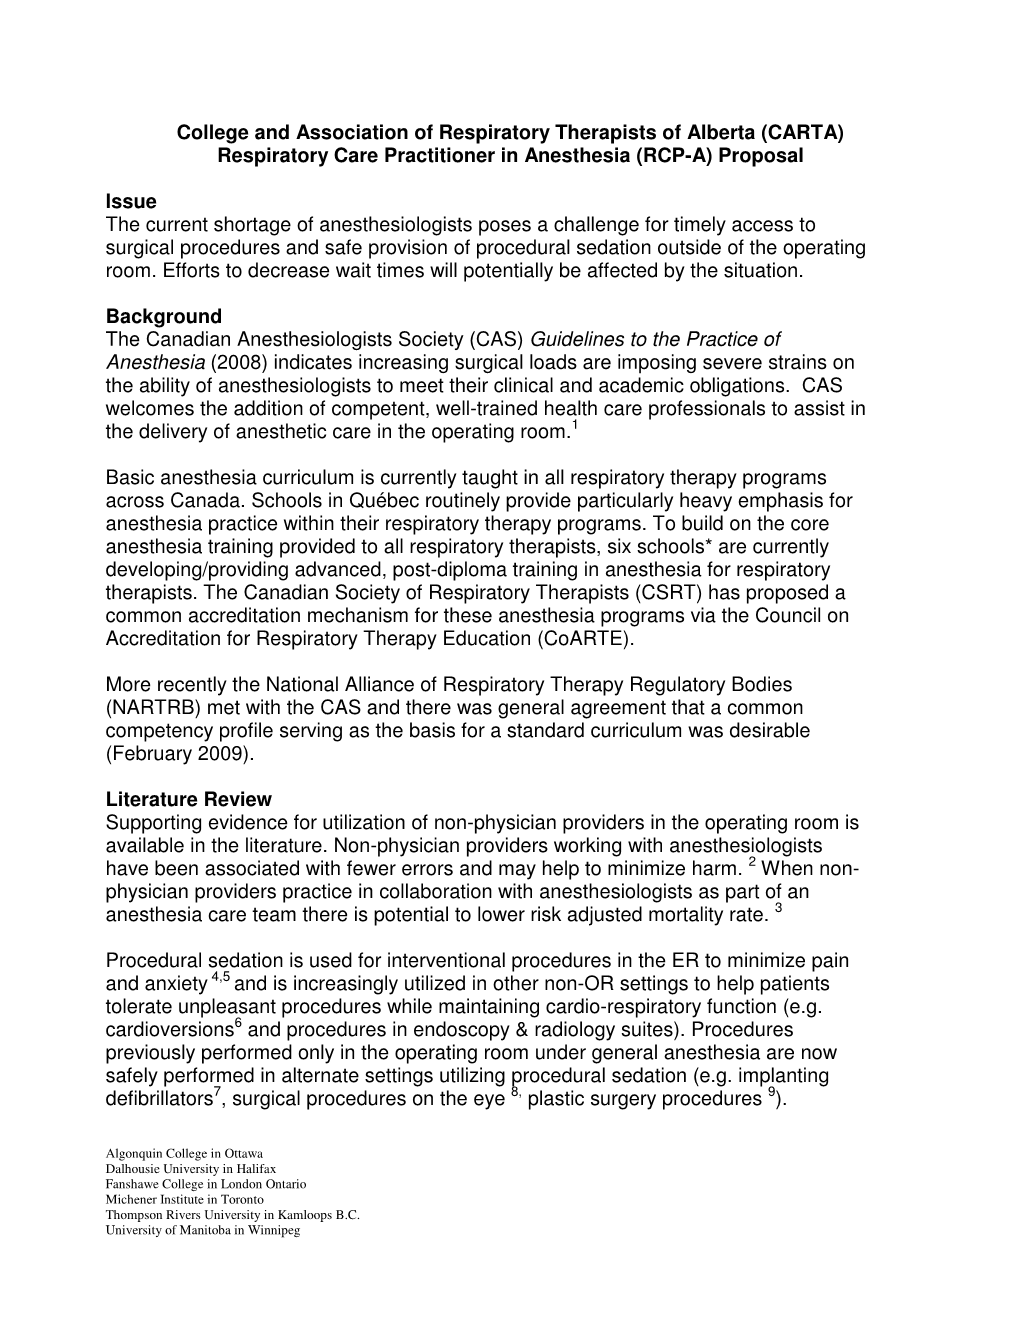 (CARTA) Respiratory Care Practitioner in Anesthesia (RCP-A) Proposal